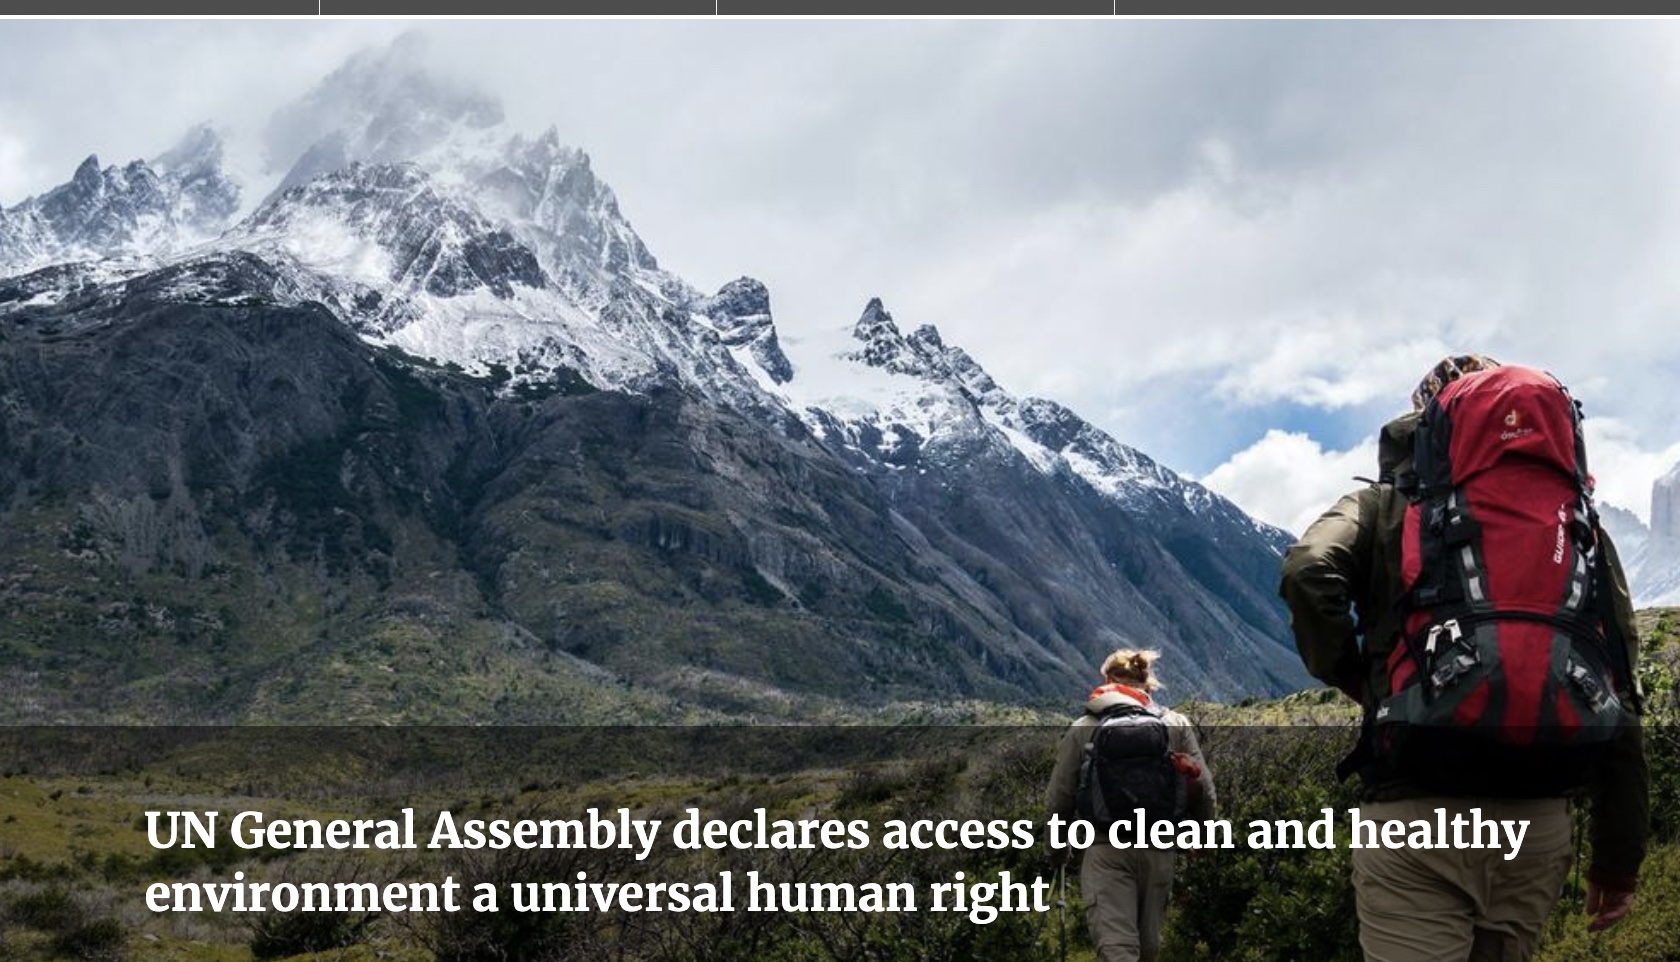 UN General Assembly declares access to clean and healthy environment a universal human right